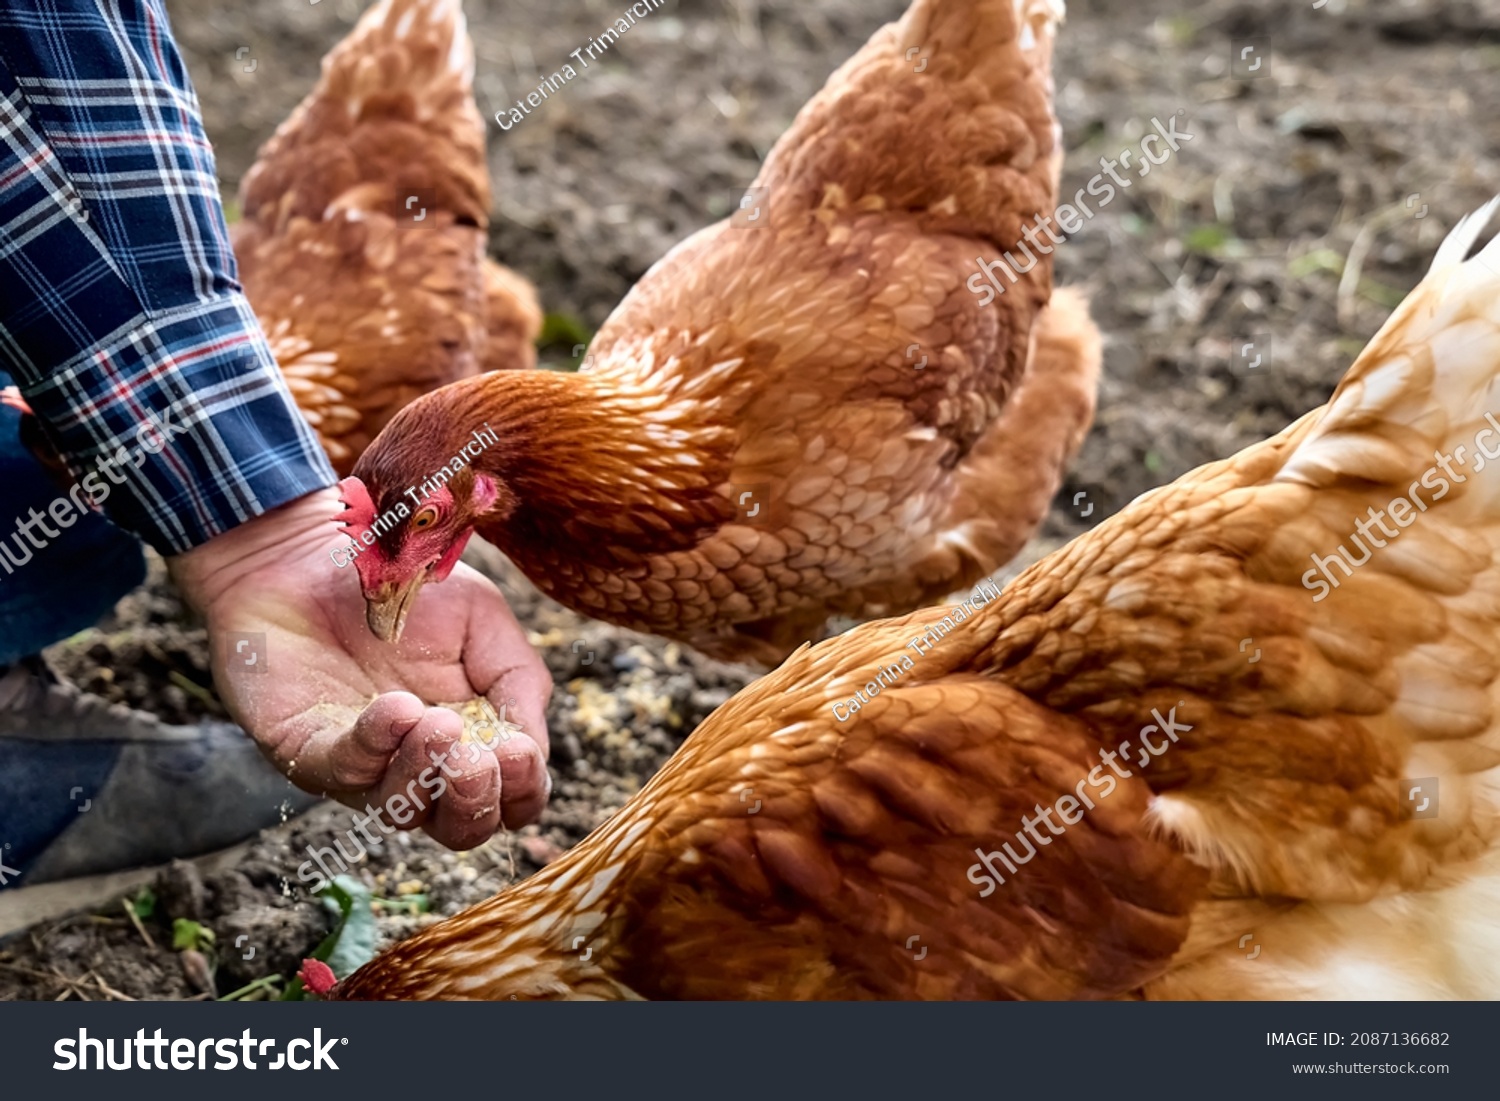 Man feeding hens from hand in the farm. Free-grazing domestic hen on a traditional free range poultry organic farm. Adult chicken walking on the soil. Defocused foreground.  #2087136682